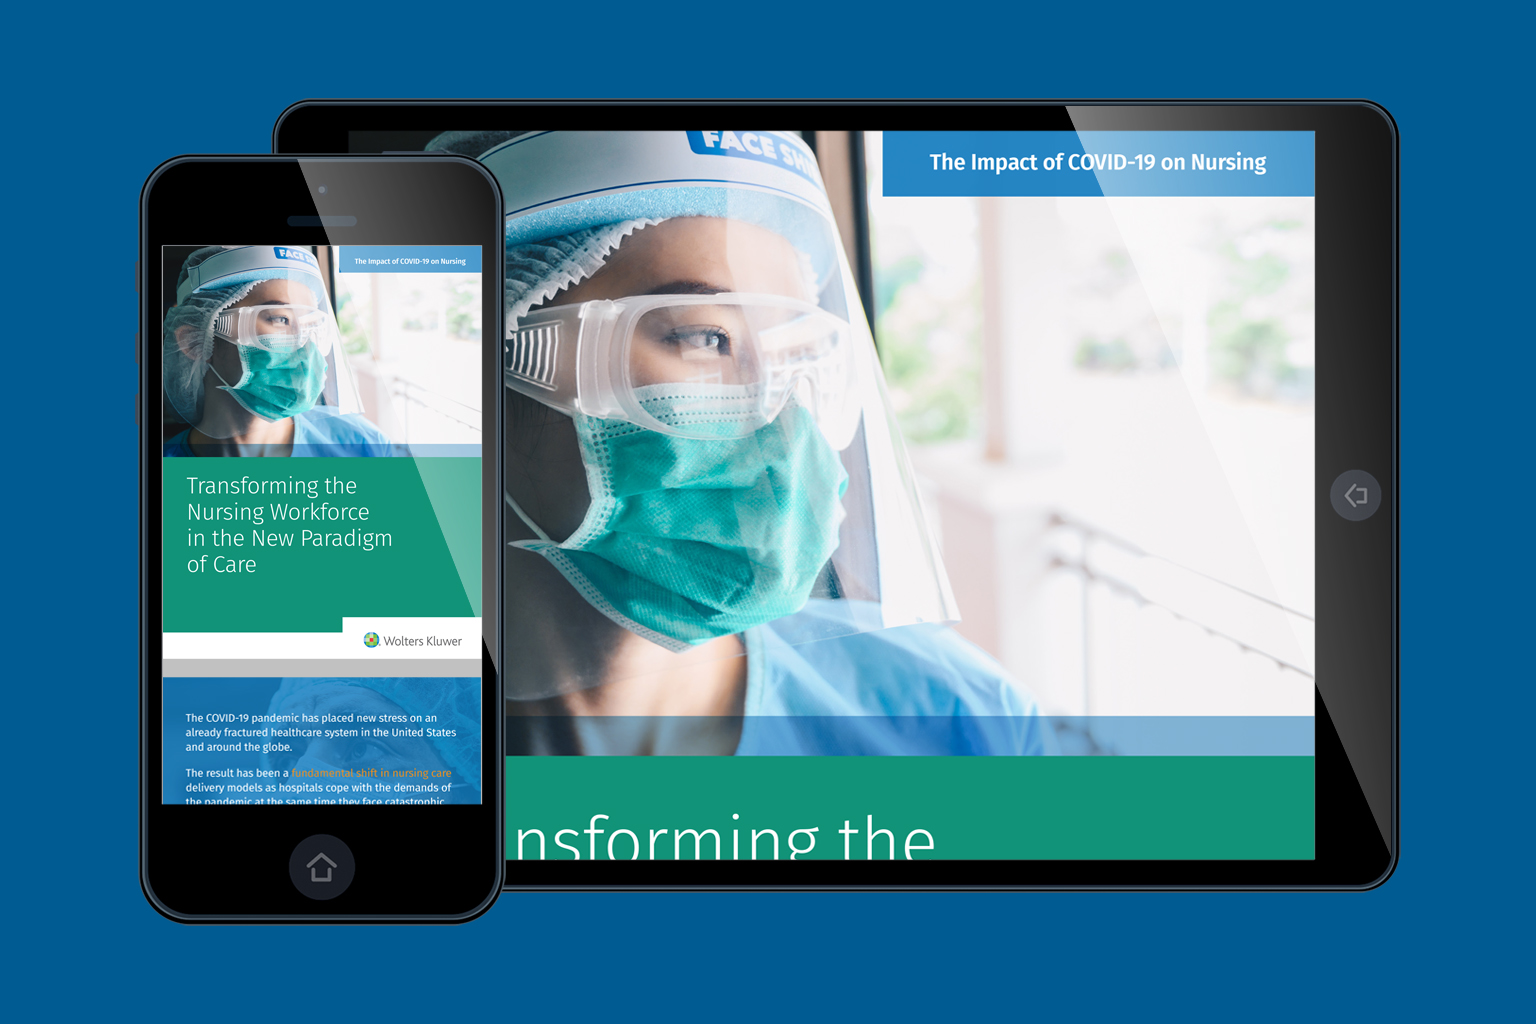 Transforming the Nursing Workforce in the New Paradigm of Care eBook cover shown on mobile and tablet devices